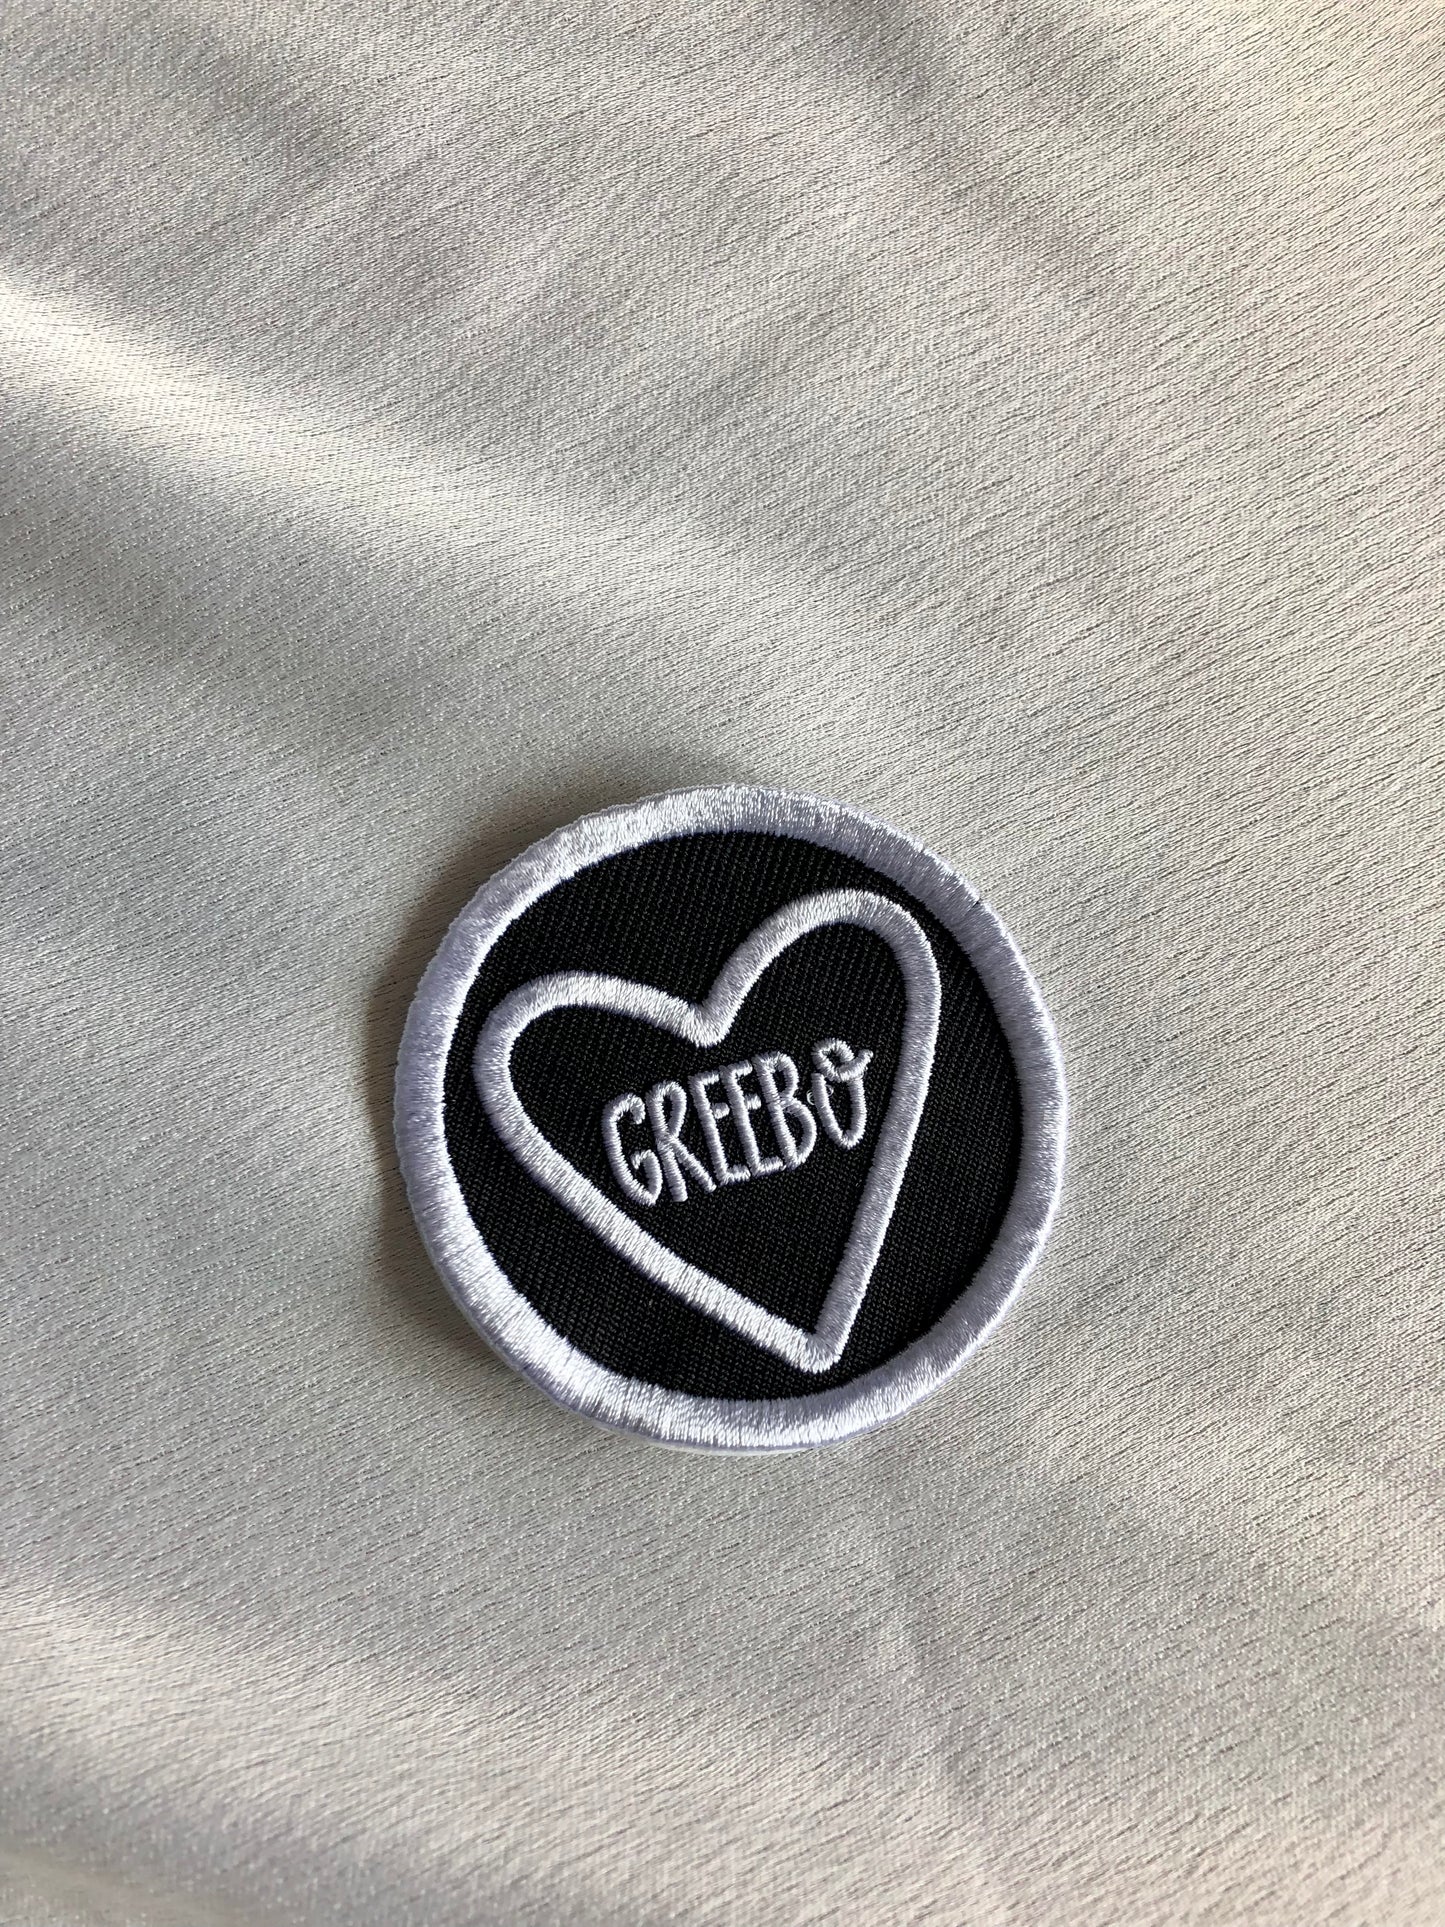 Heart Logo Patches - ready to ship